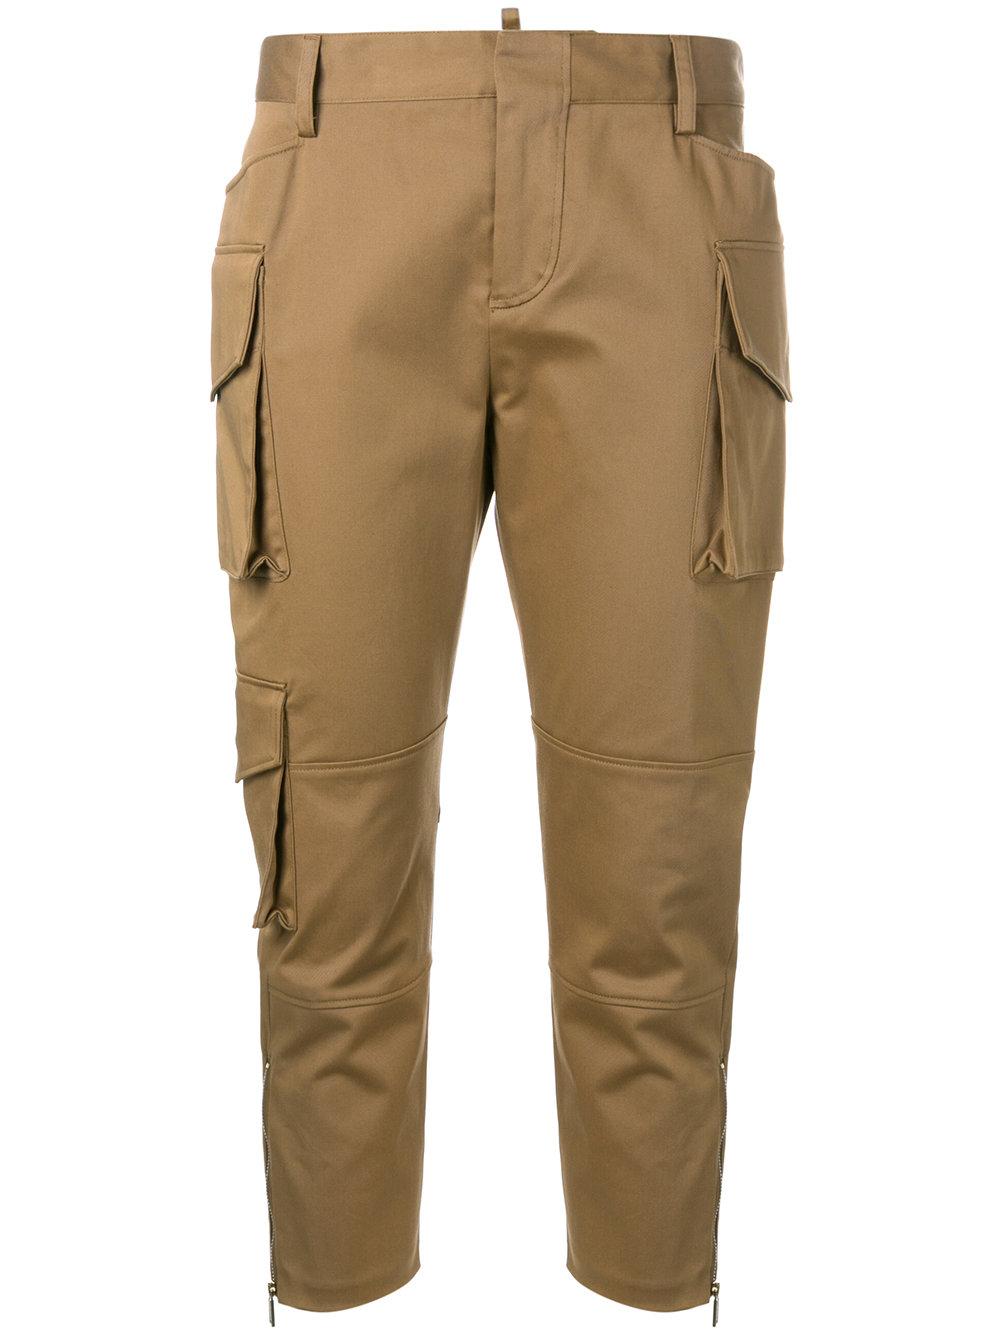 Lyst - Dsquared² Skinny Cropped Cargo Pants in Brown